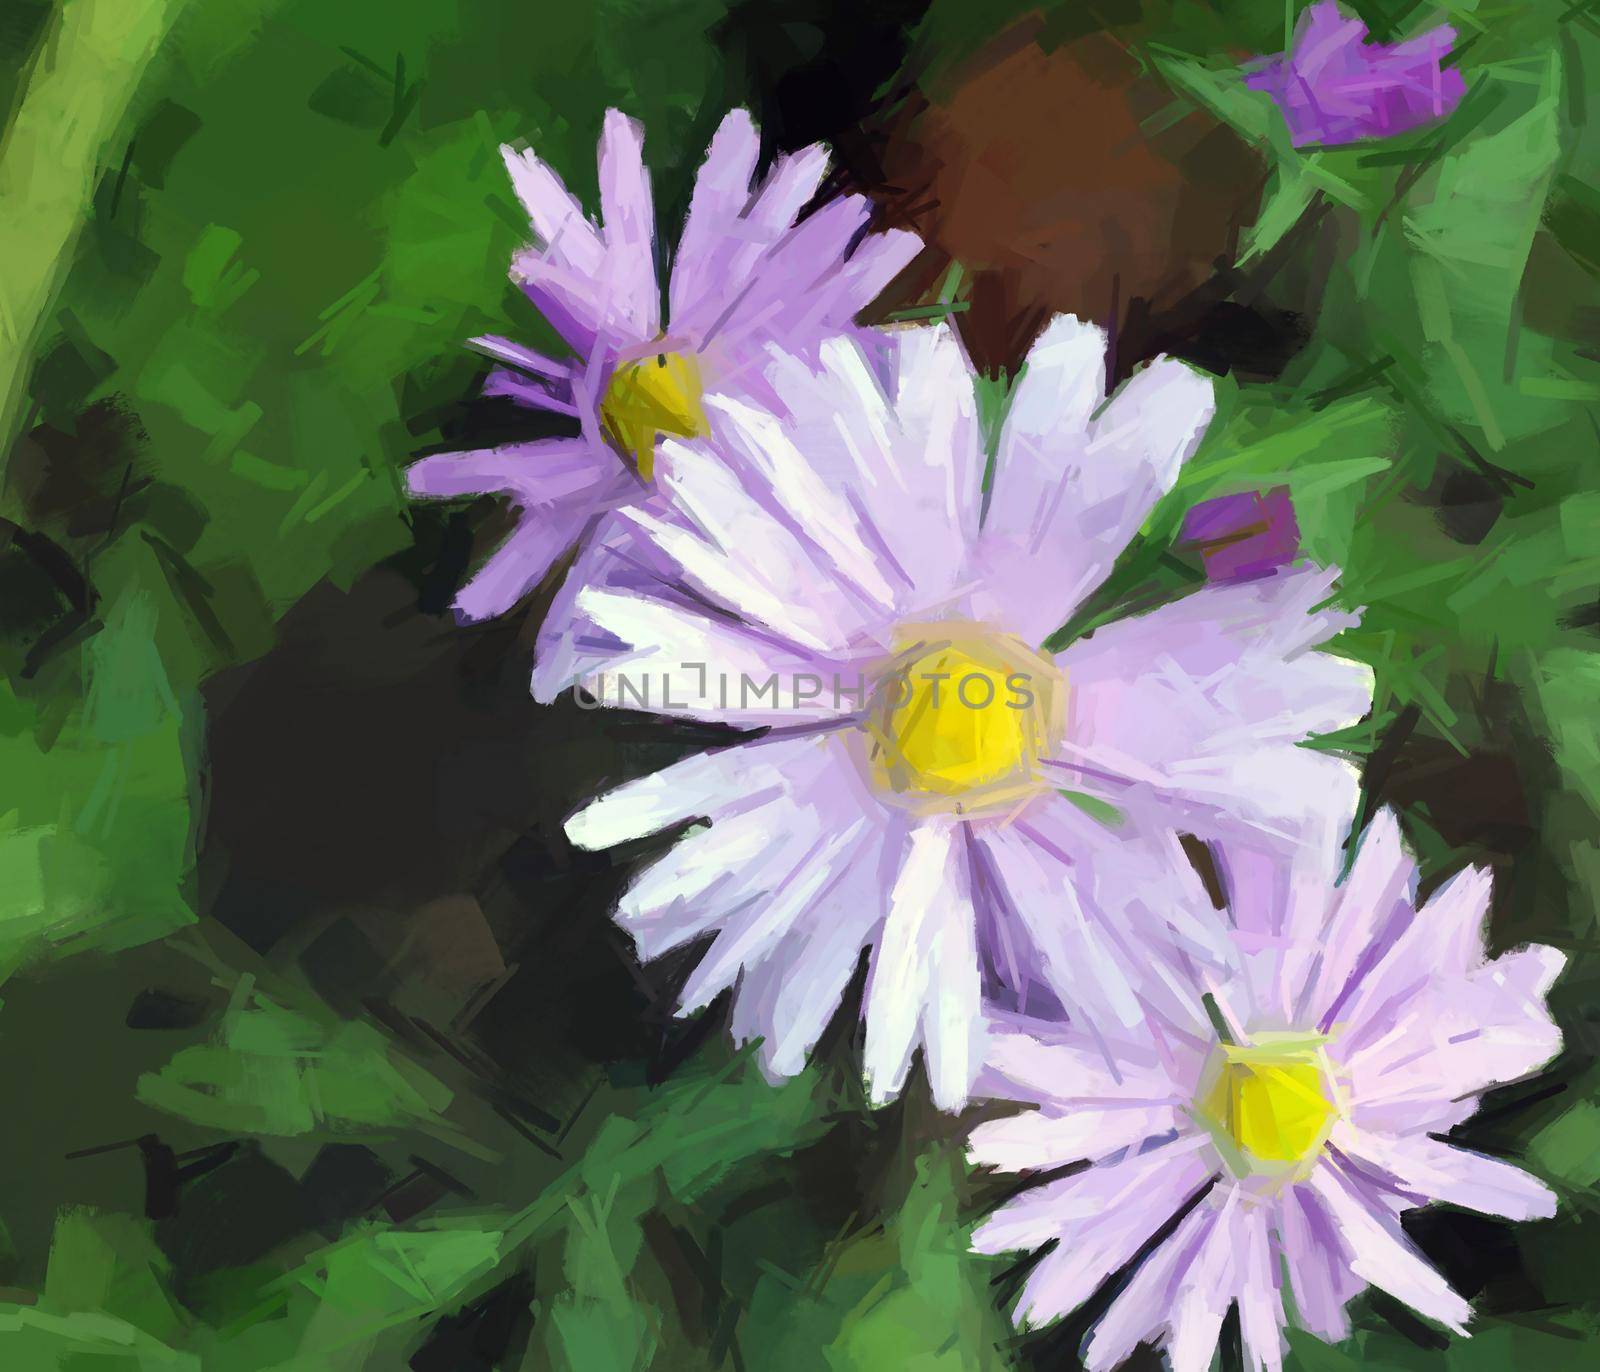 Digital painting with purple flowers over green